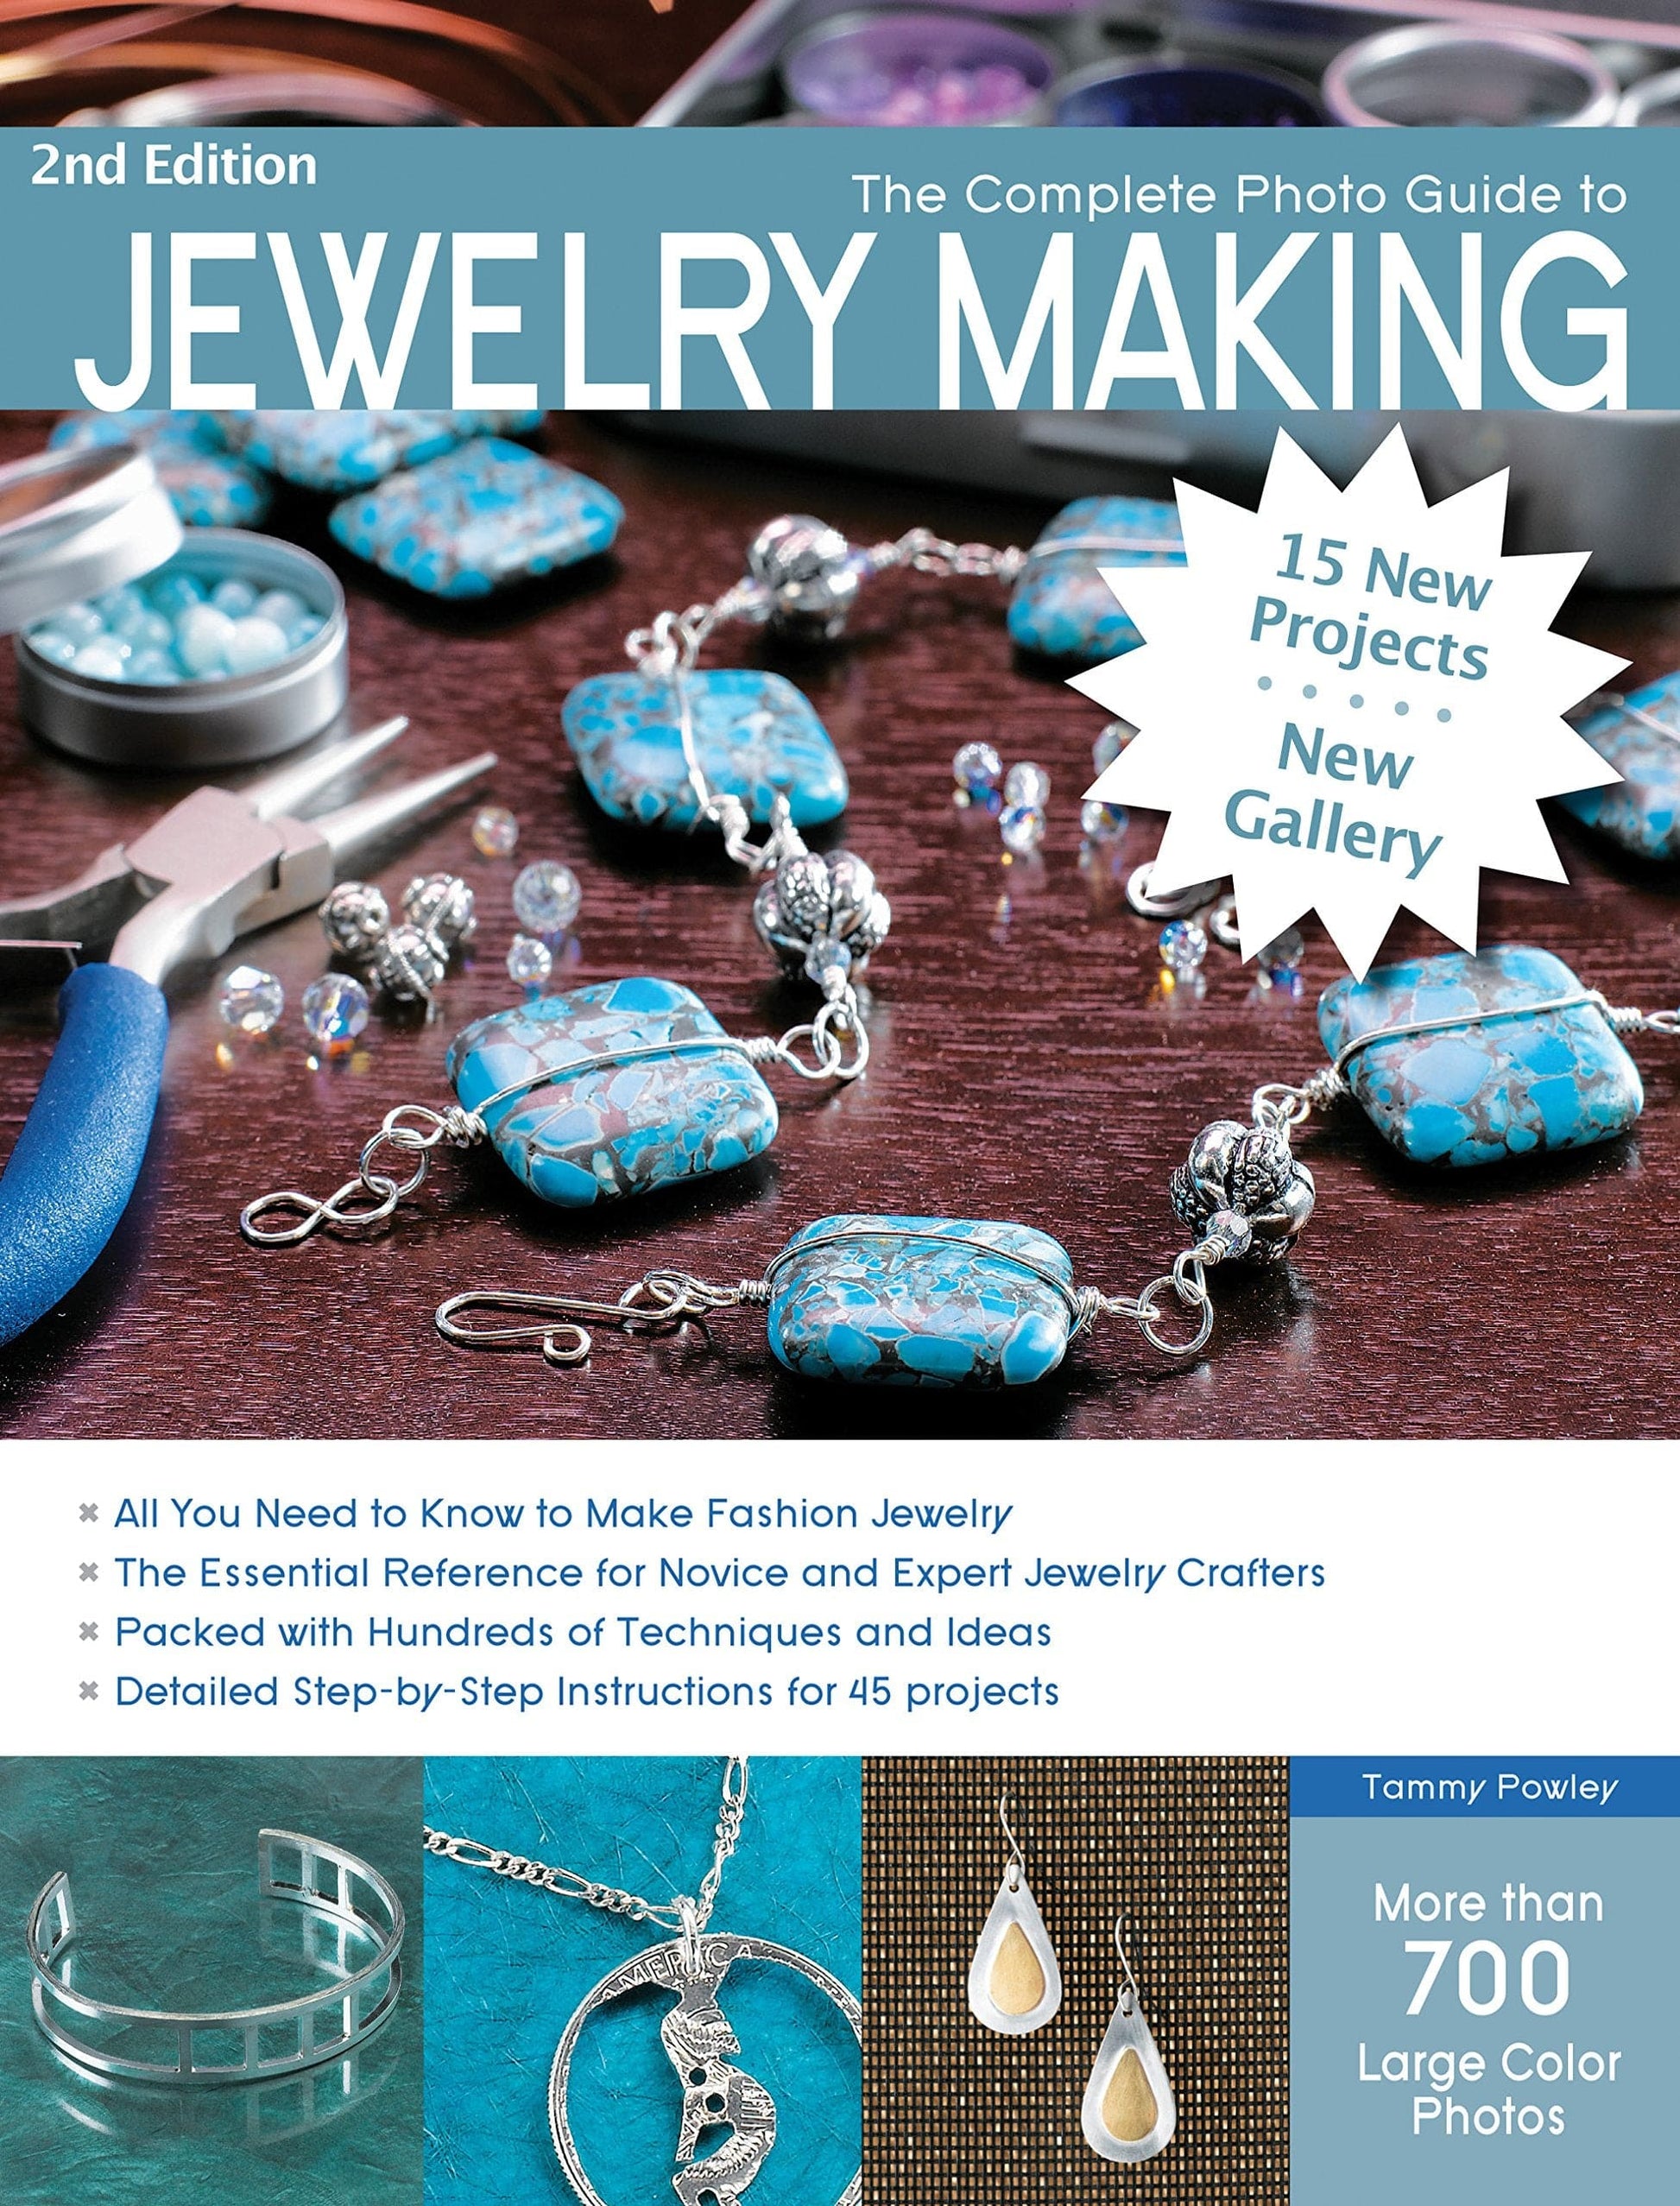 Marissa's Books & Gifts, LLC 9781589238022 The Complete Photo Guide to Jewelry Making, 2nd Edition: 15 New Projects, New Gallery